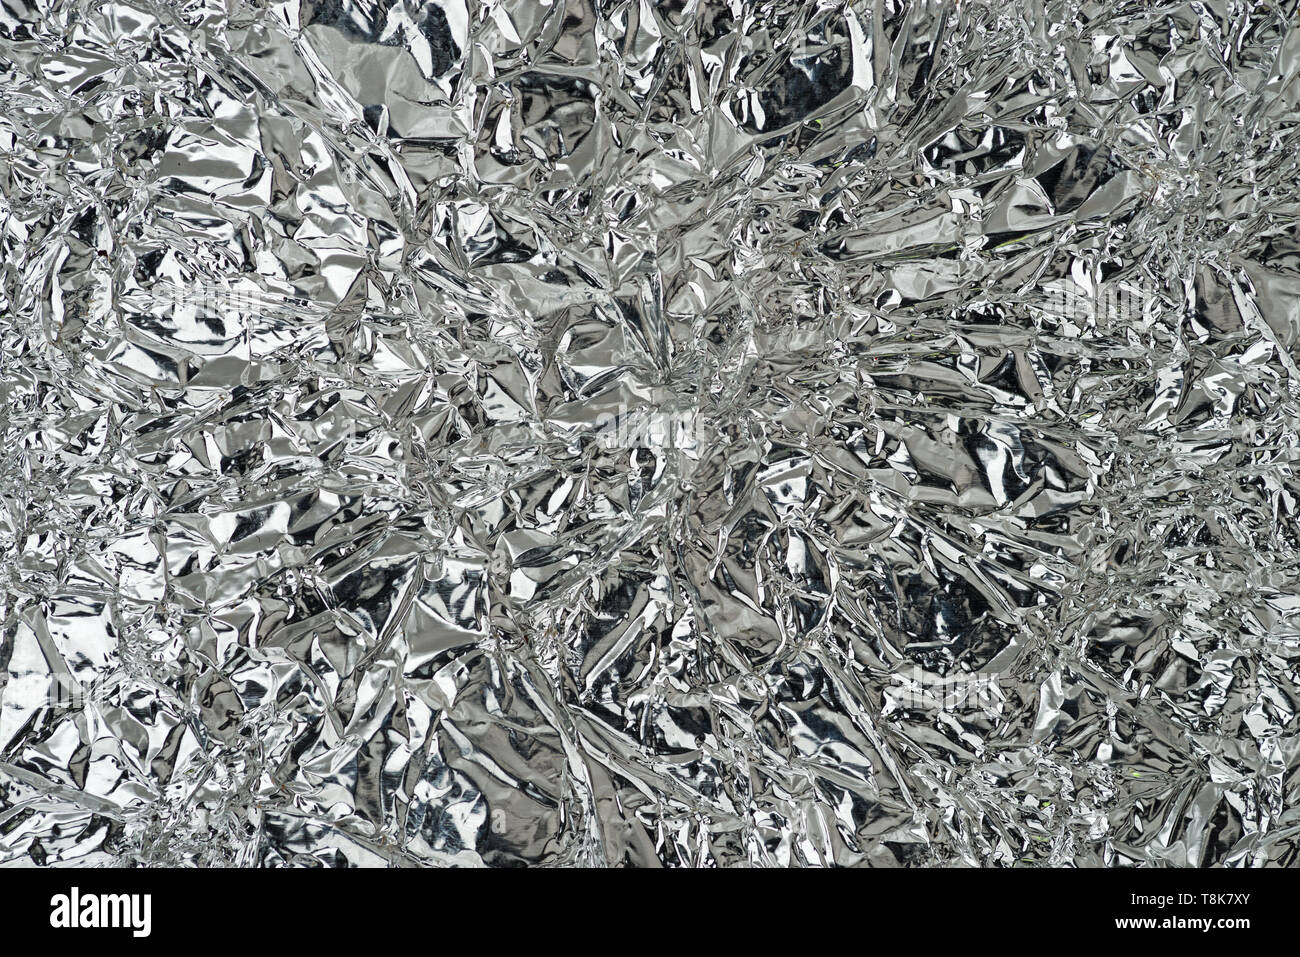 wrinkled and bent silver reflective metal foil background texture Stock Photo